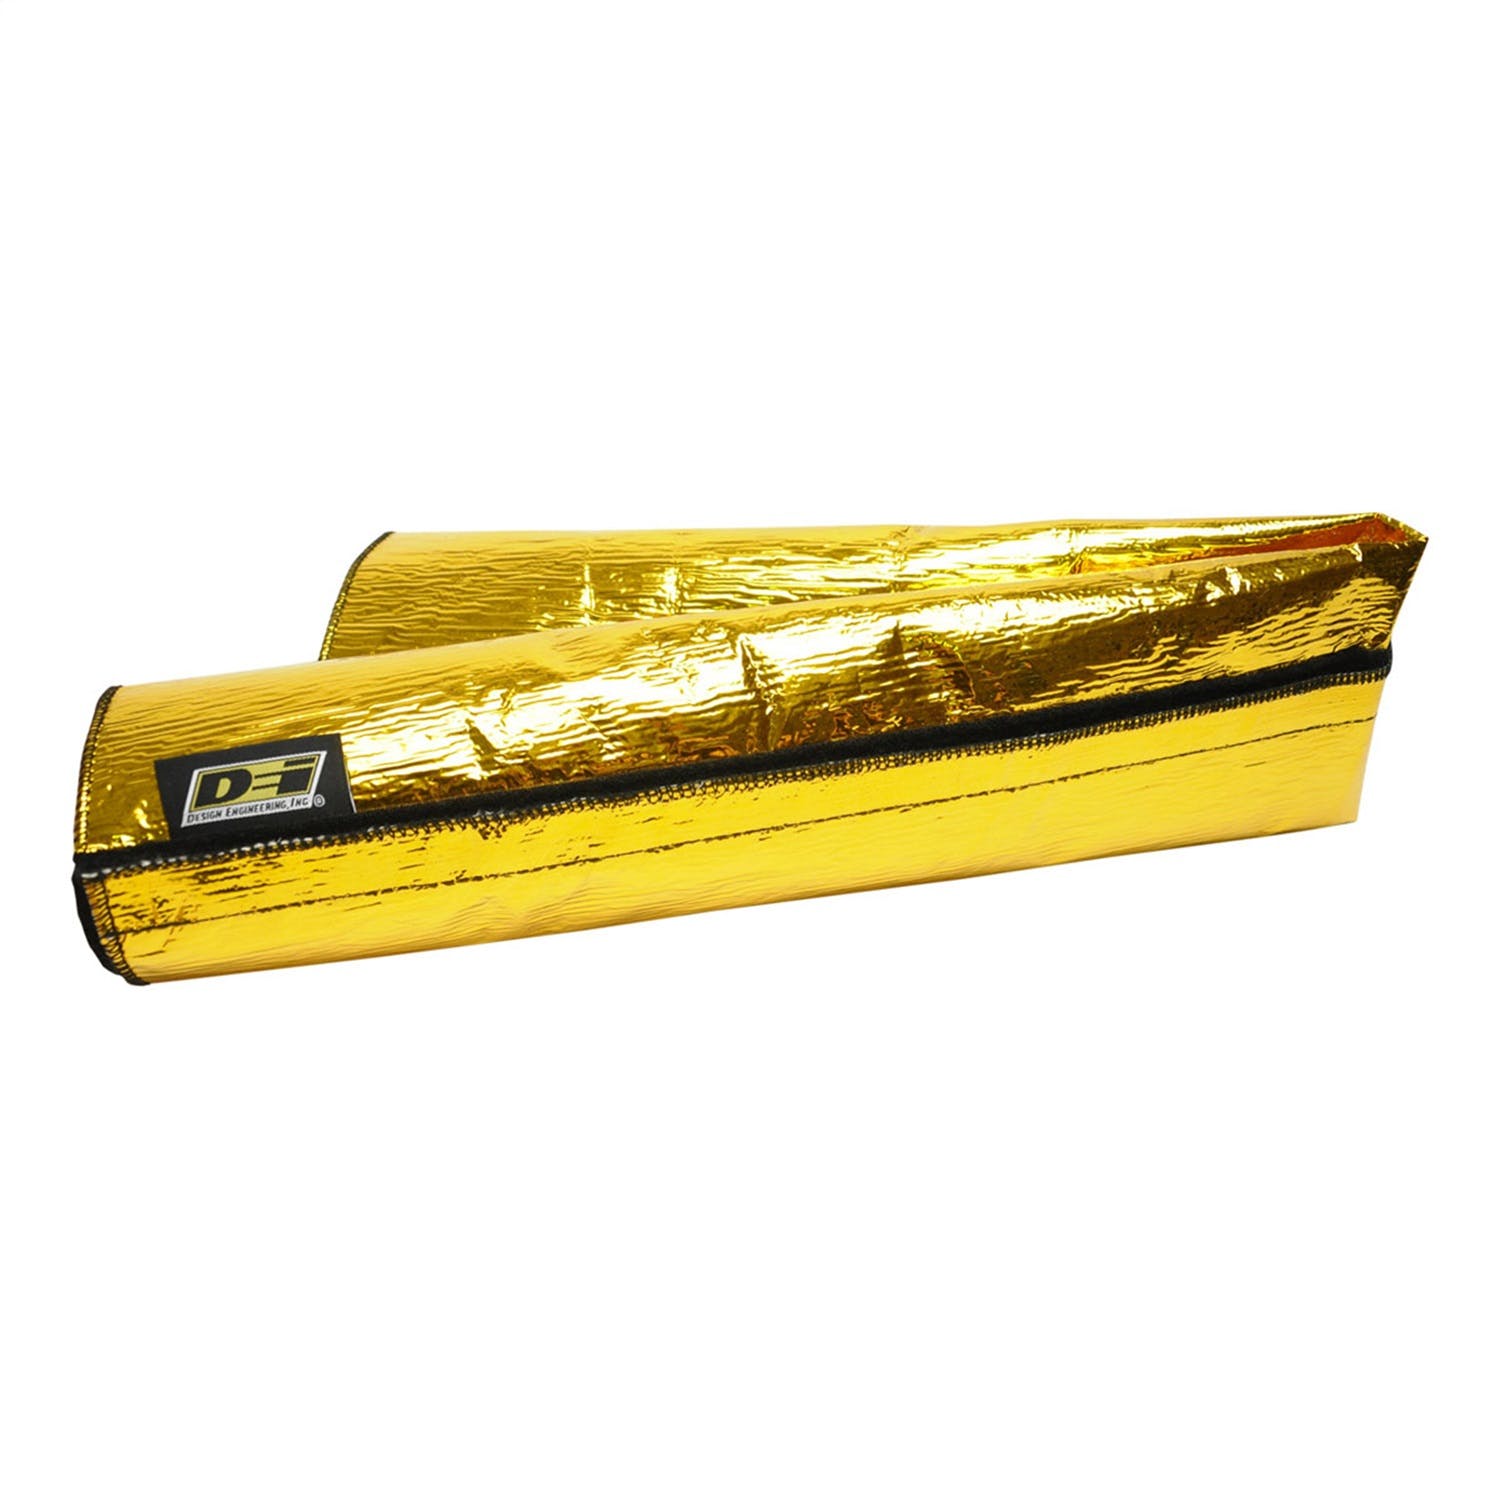 Design Engineering, Inc. 10486 Cool Cover Gold - 14 w x 28 - Air-Tube Cover Kit